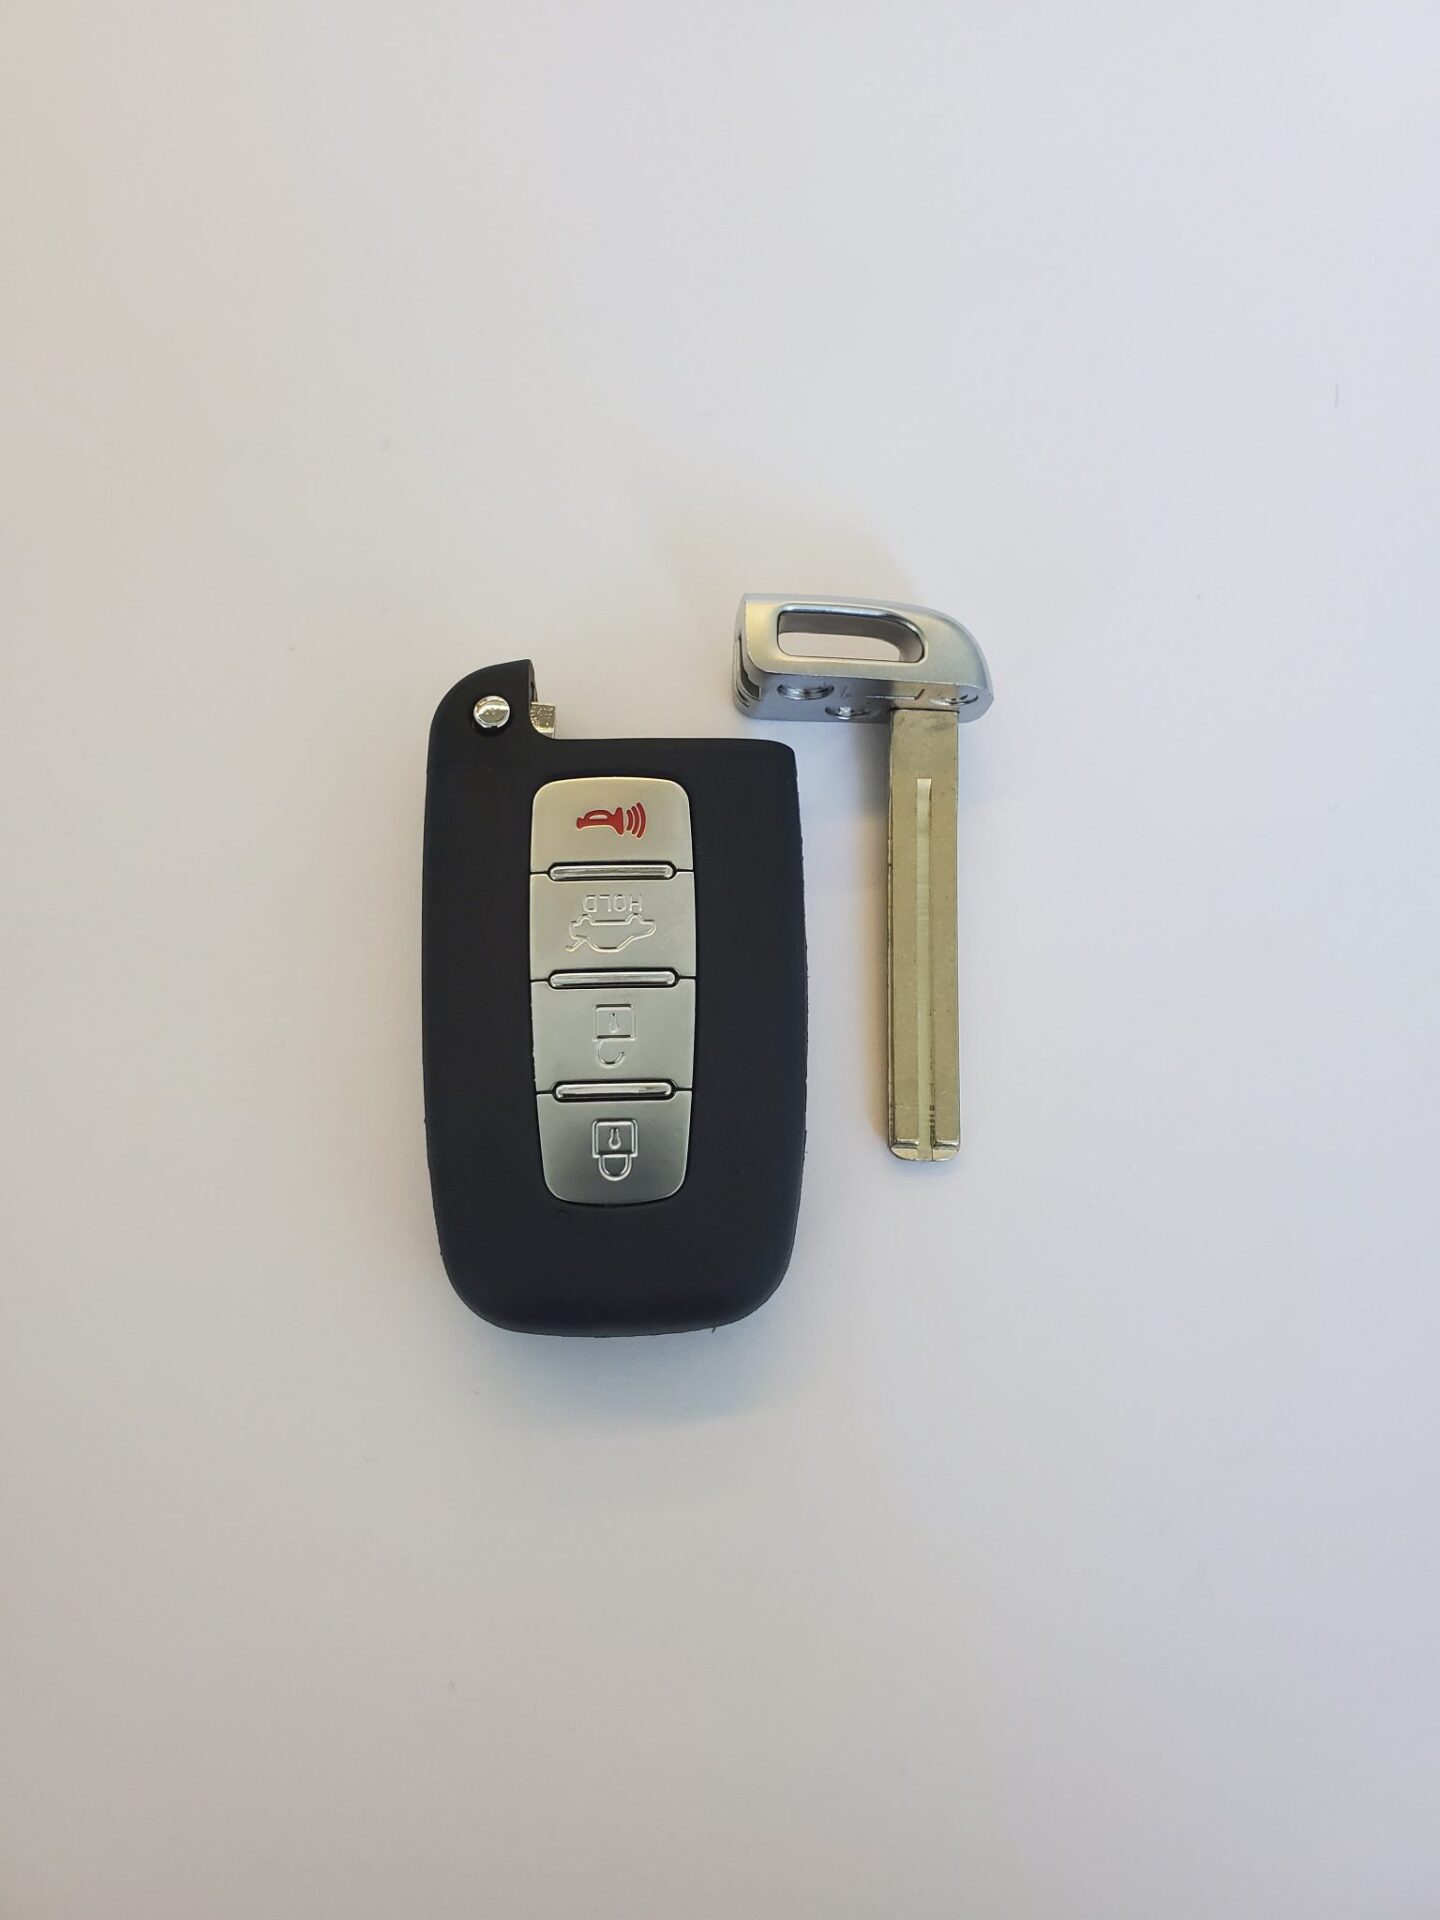 Kia Rio Key Replacement What To Do, Options, Costs & More